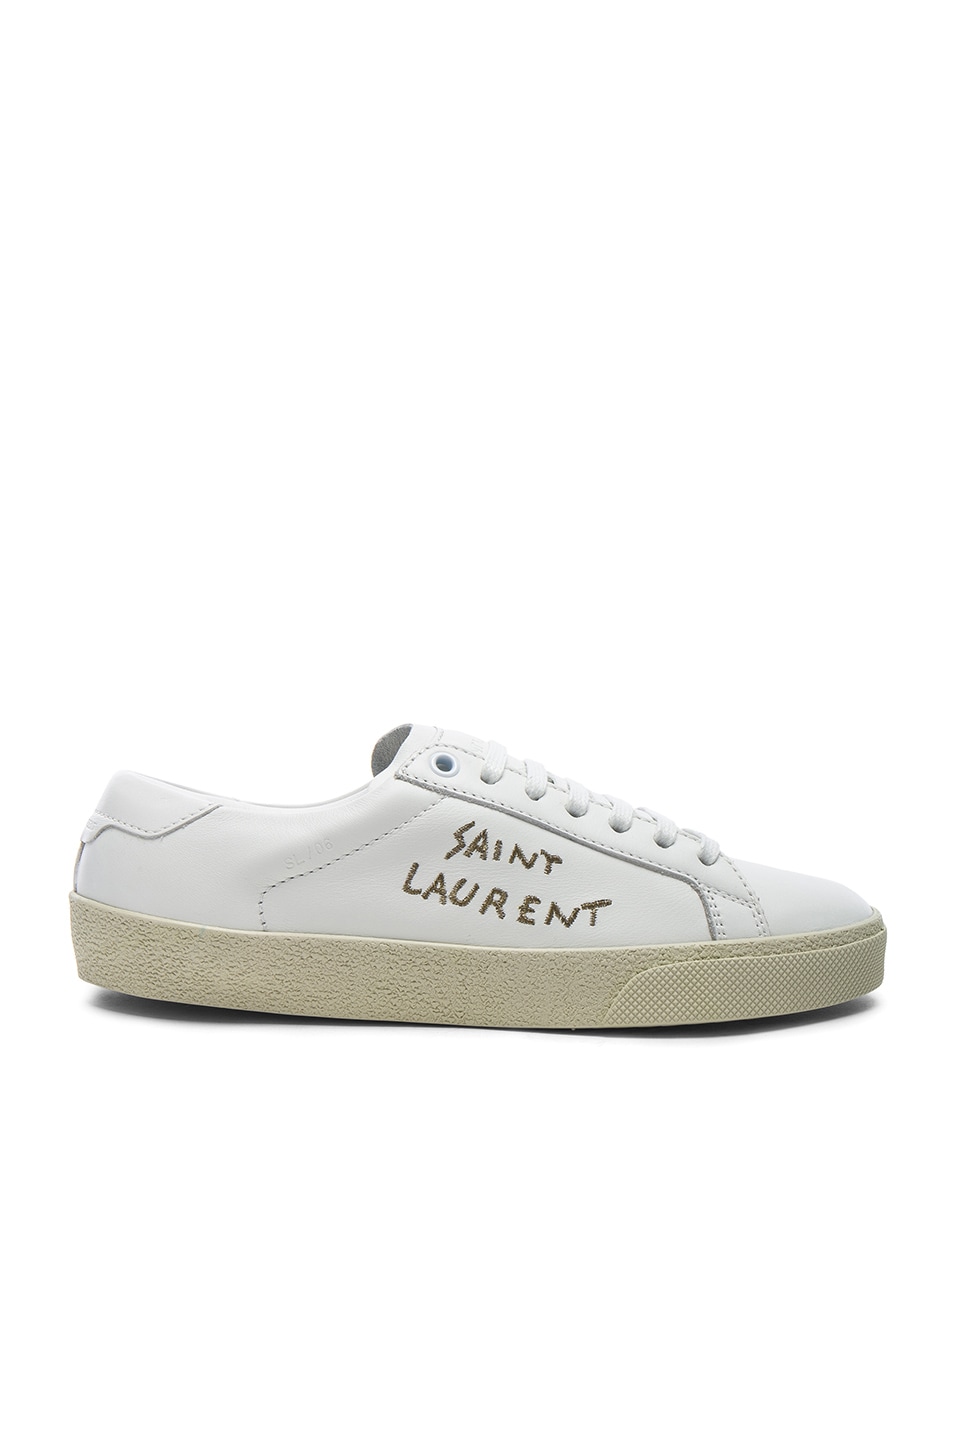 Image 1 of Saint Laurent Leather Court Classic Metallic Embroidery Sneakers in Optic White & Gold